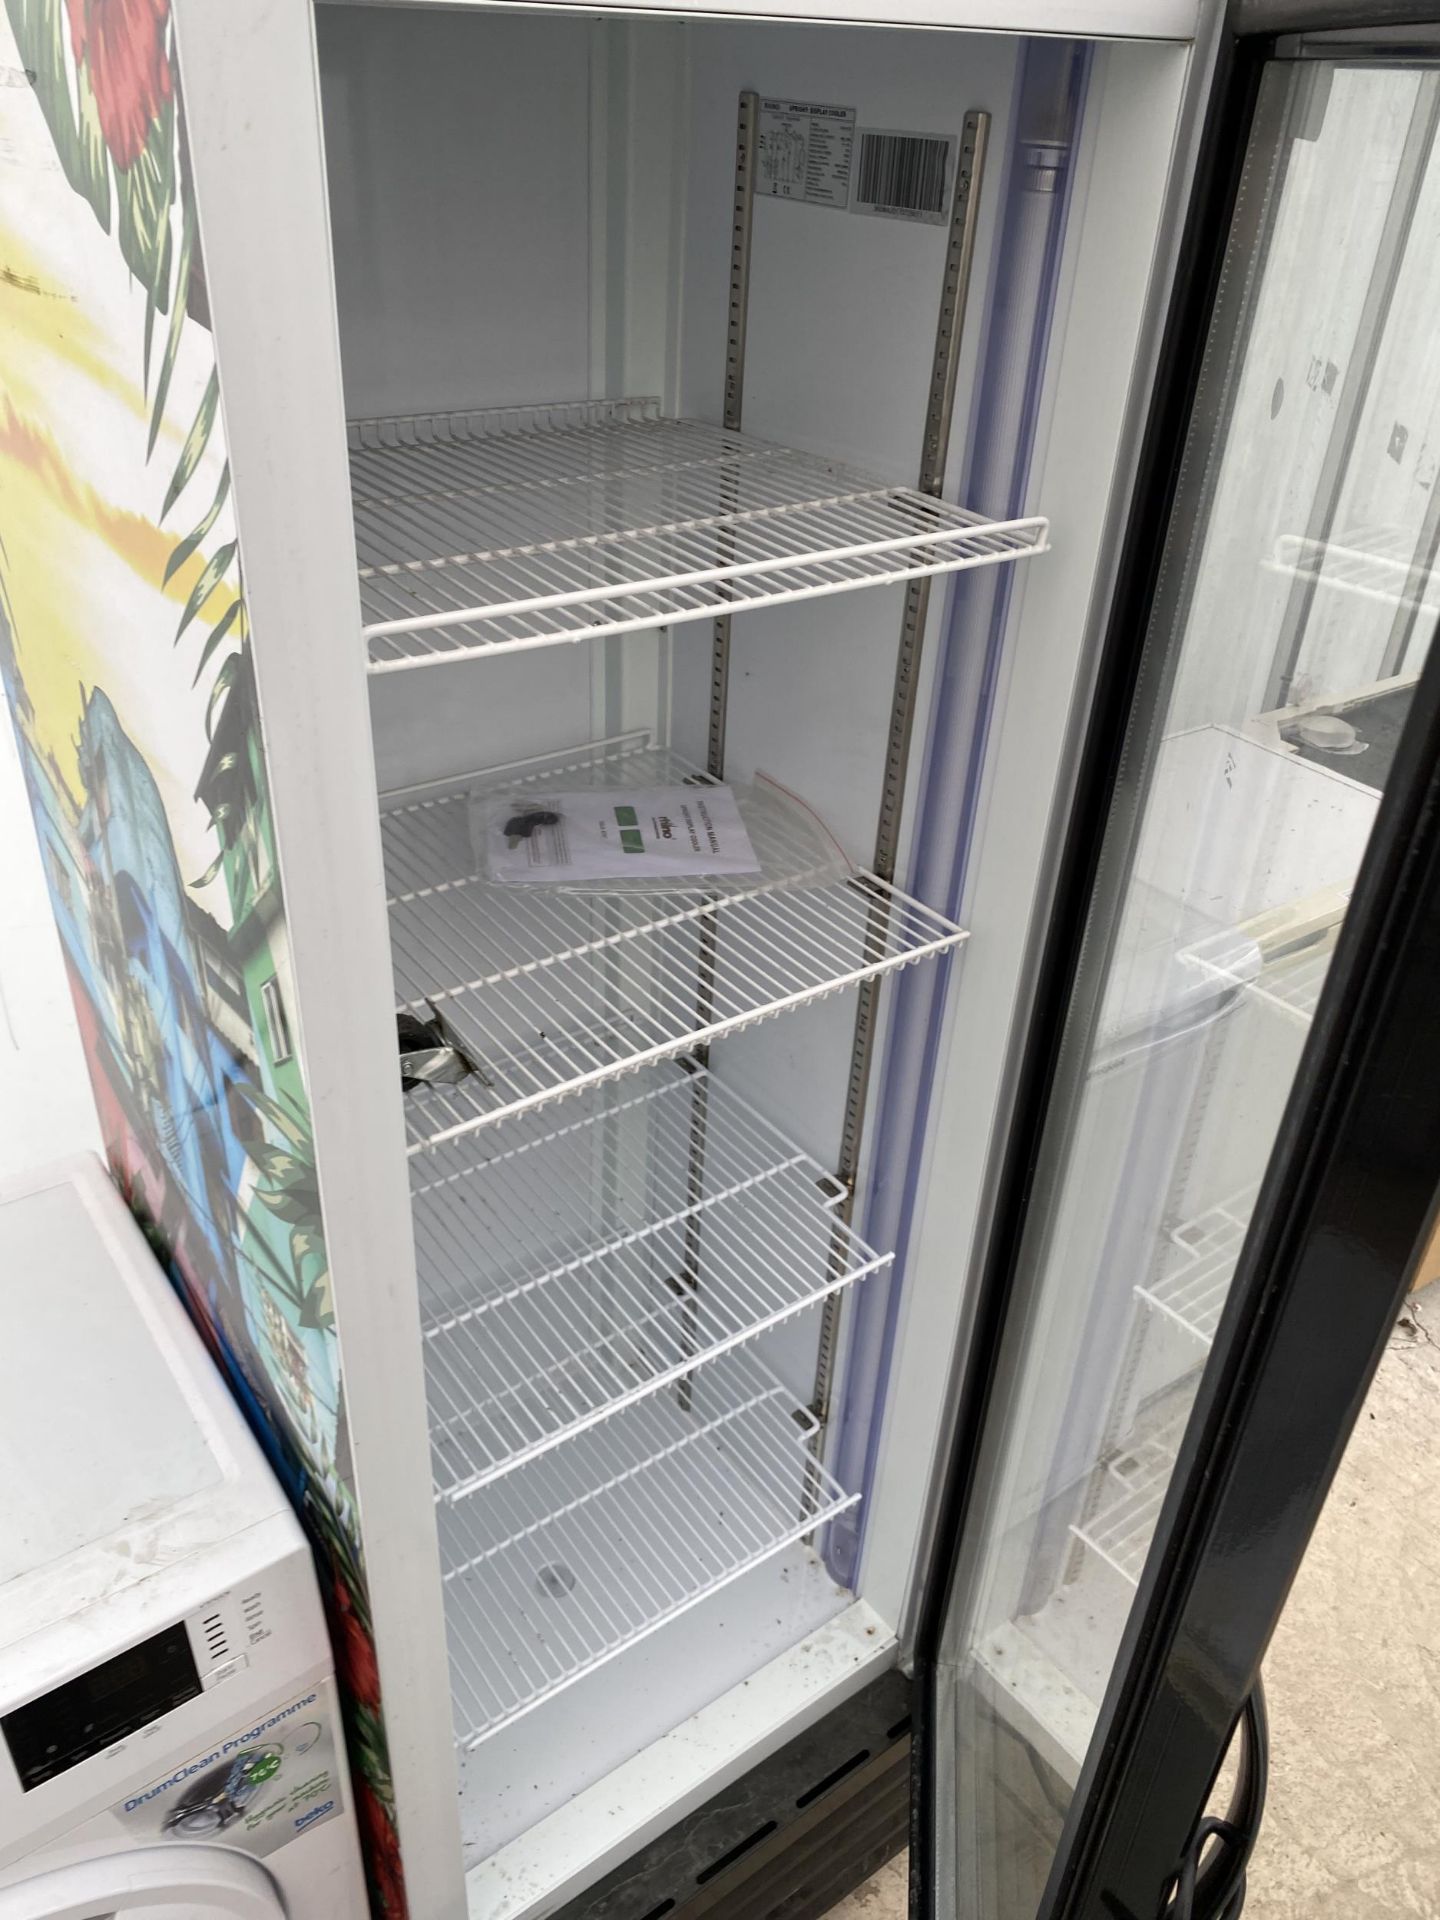 A RHINO GLASS FRONTED SHOP DISPLAY FRIDGE - Image 2 of 2